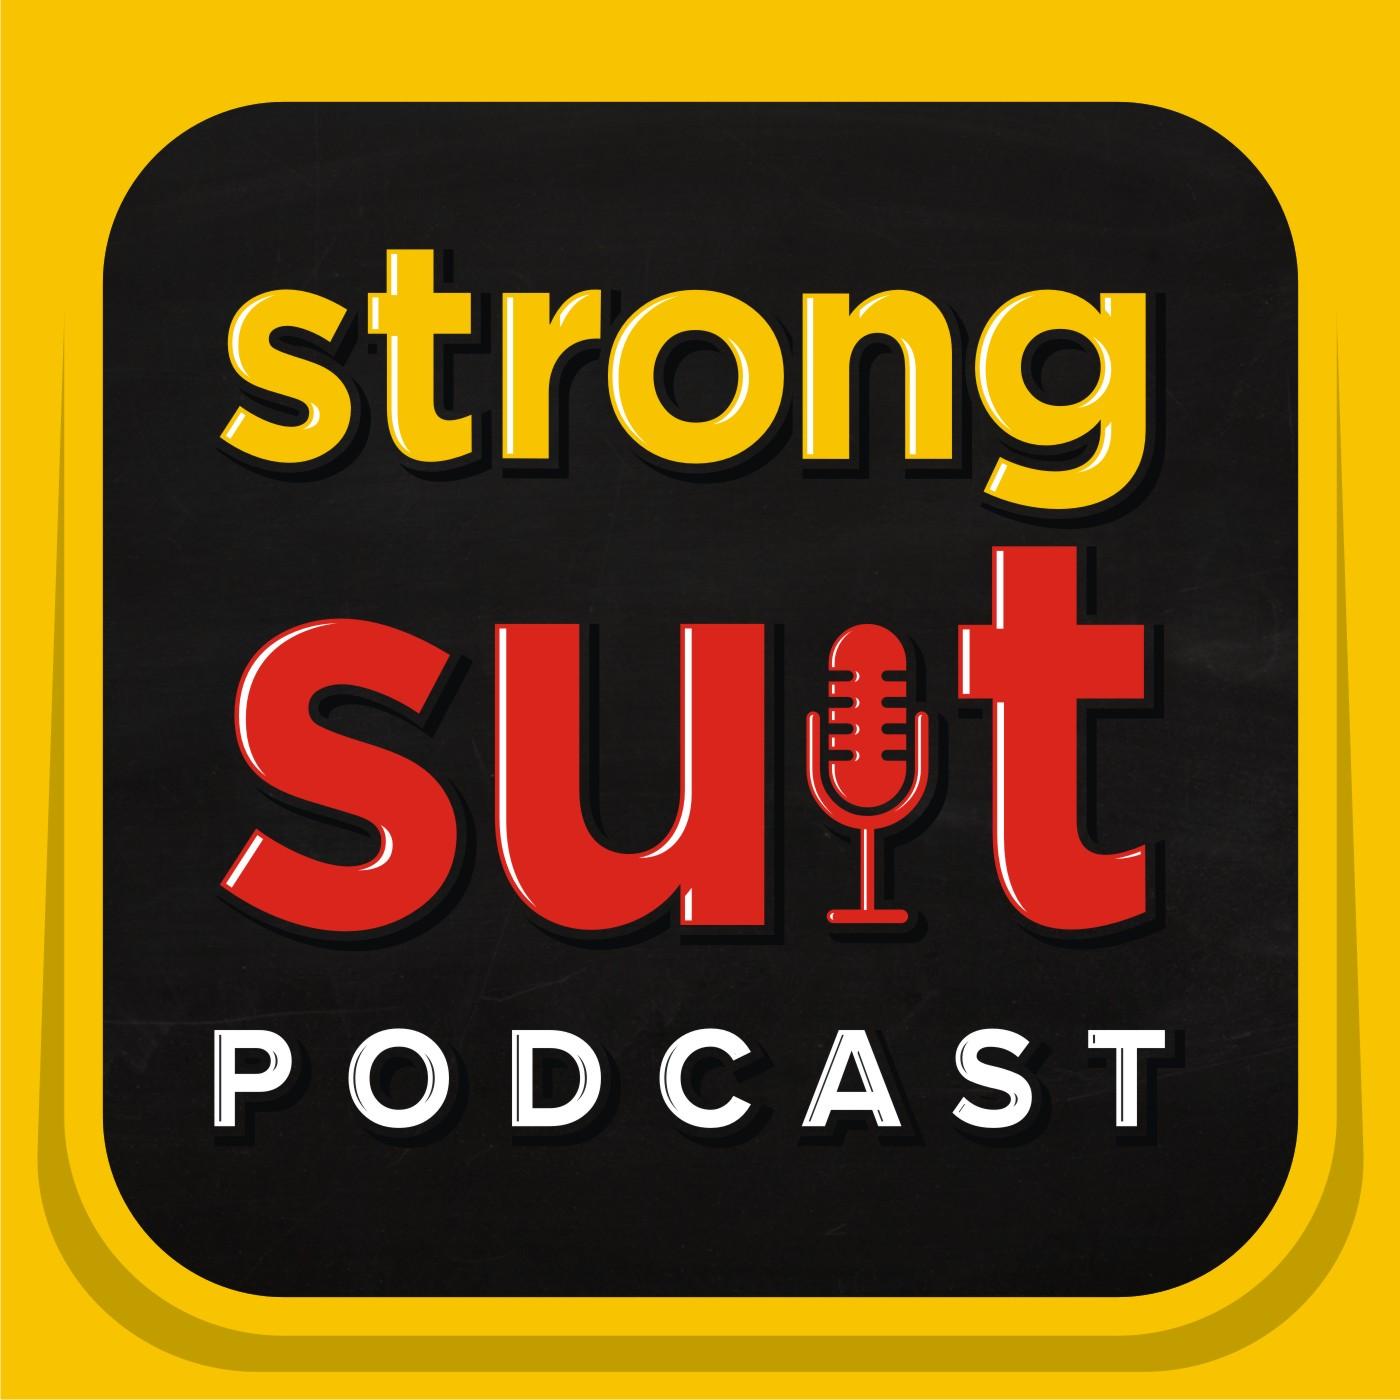 Red Suit Logo - Strong Suit Podcast logo